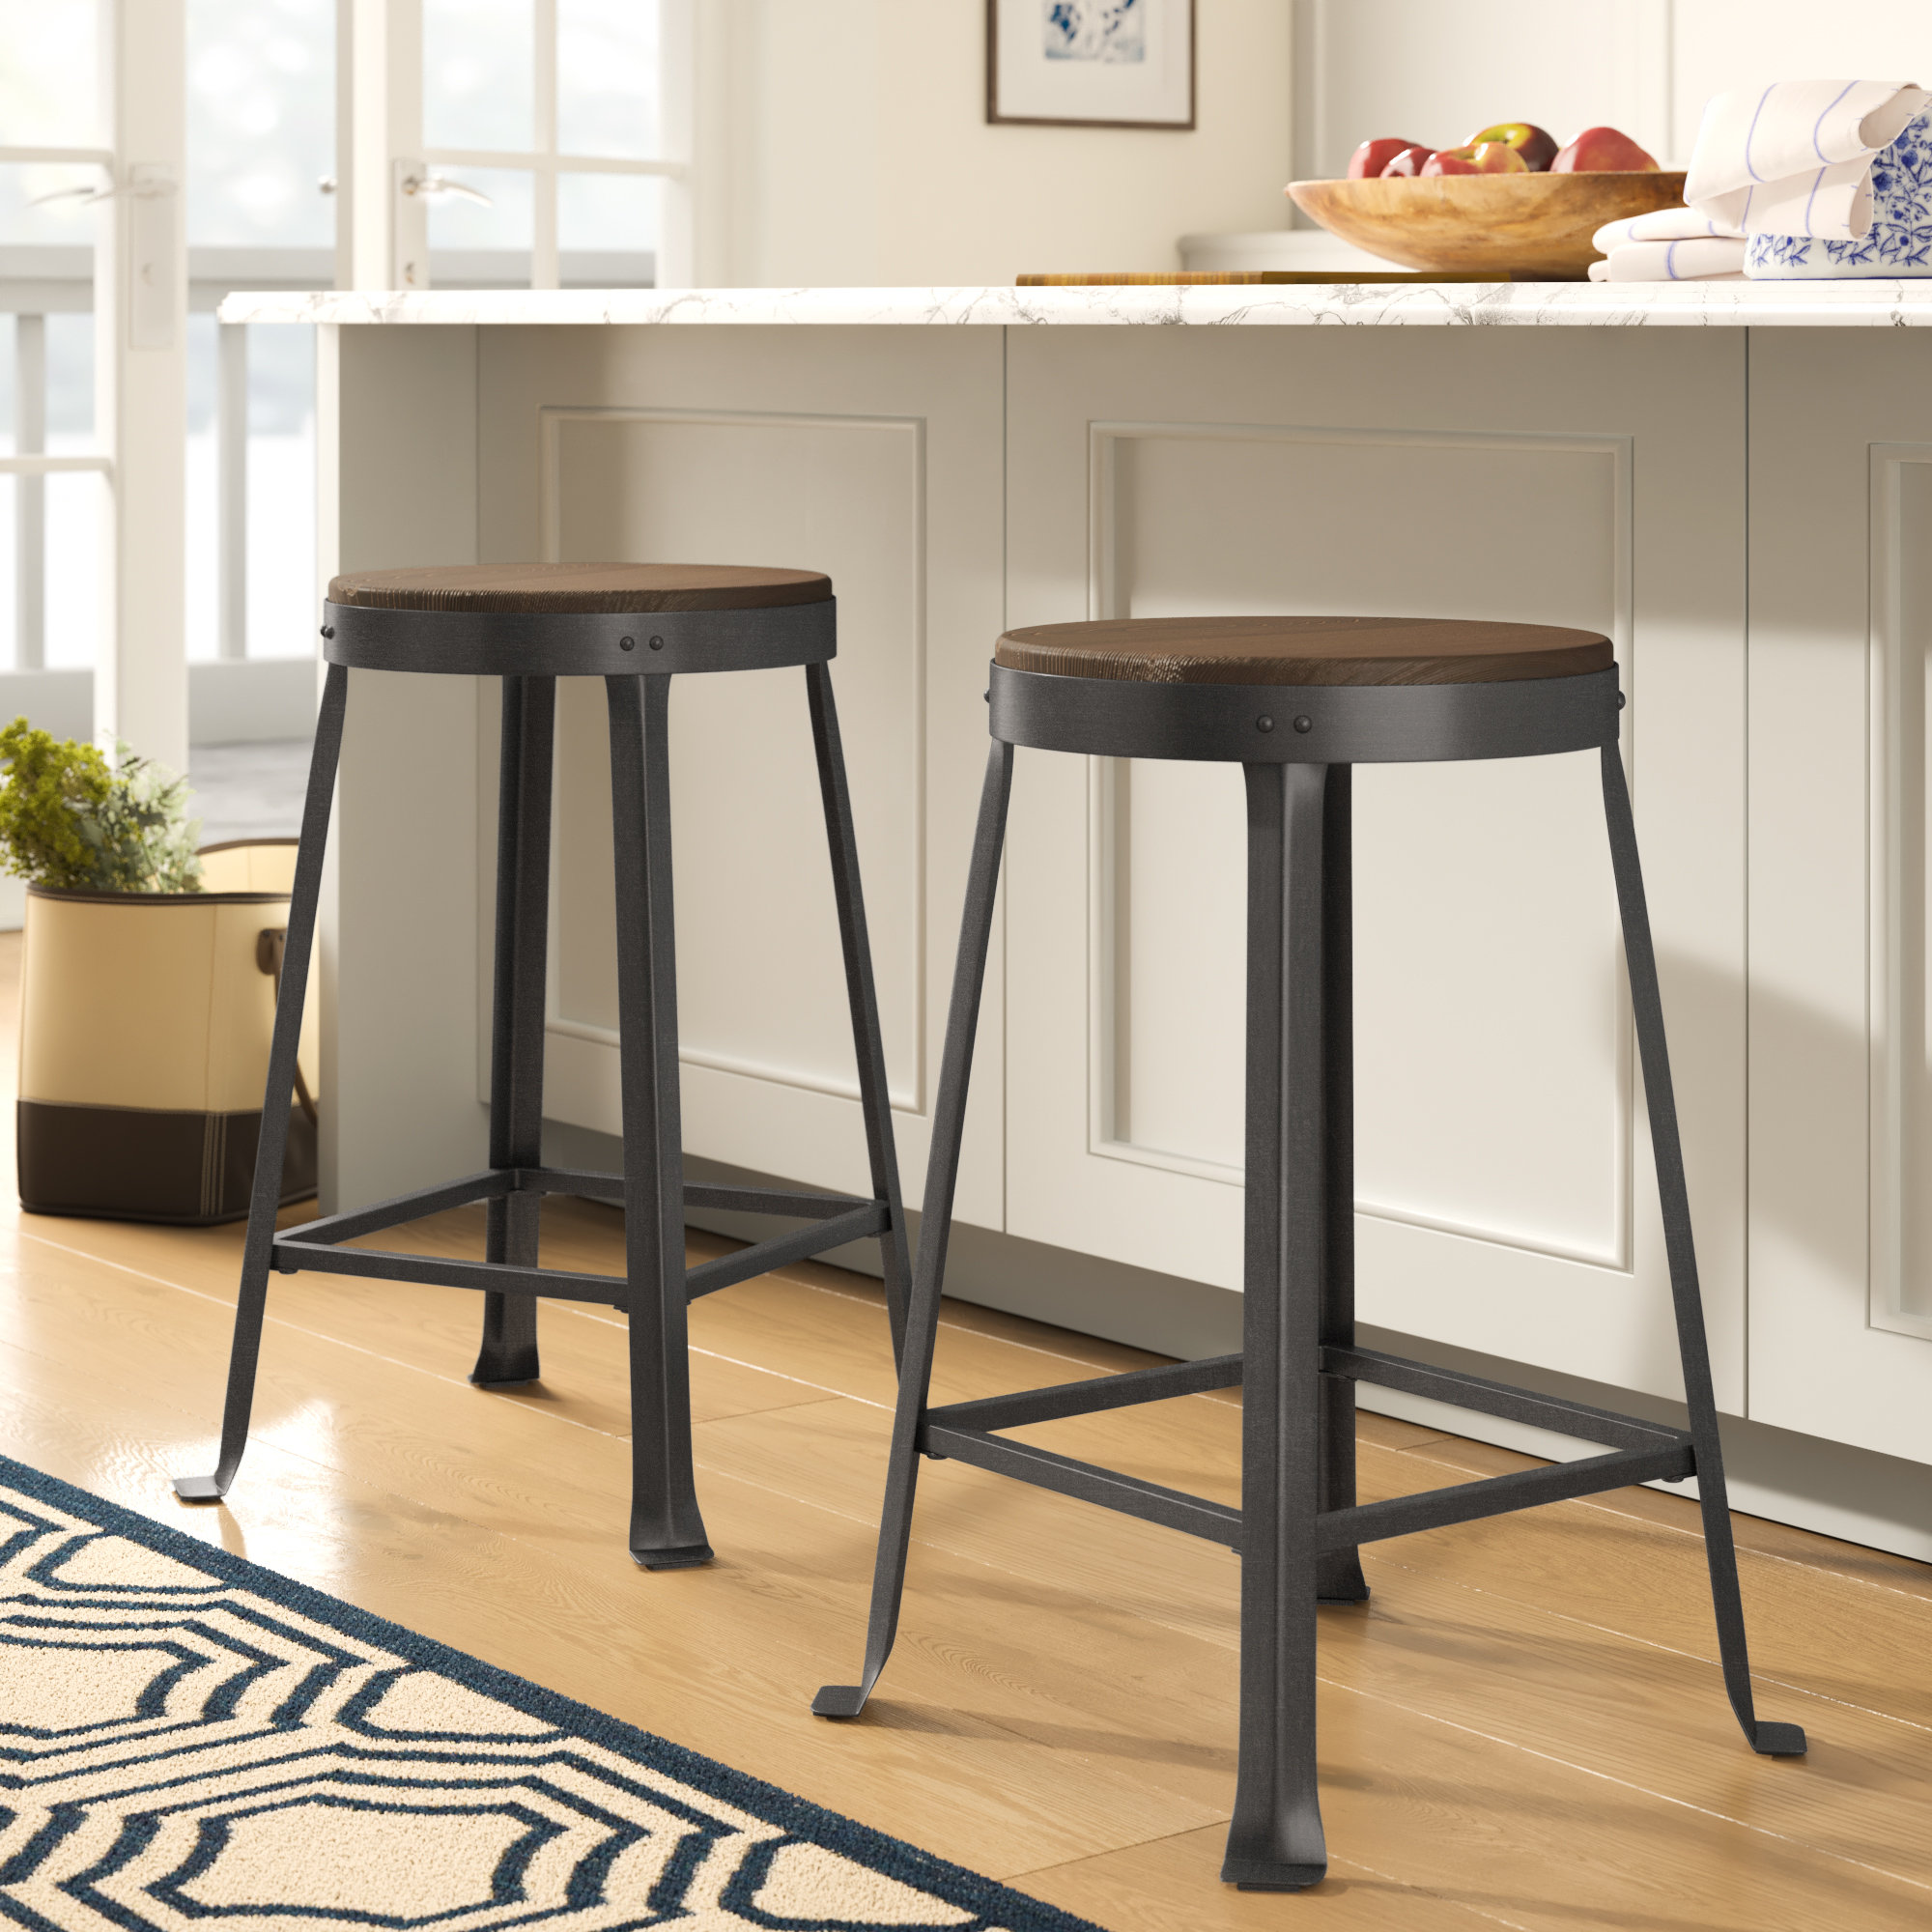 24 bar stools for sale